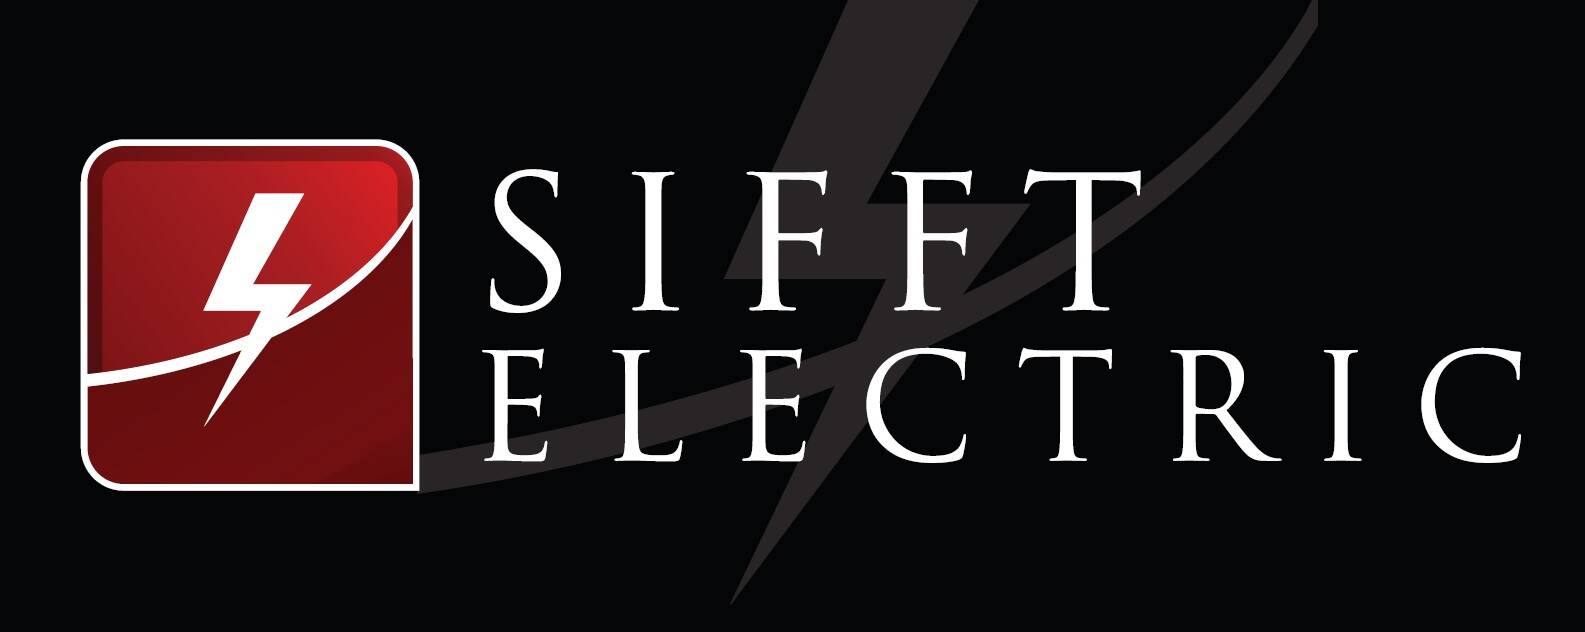 Sifft Electric 